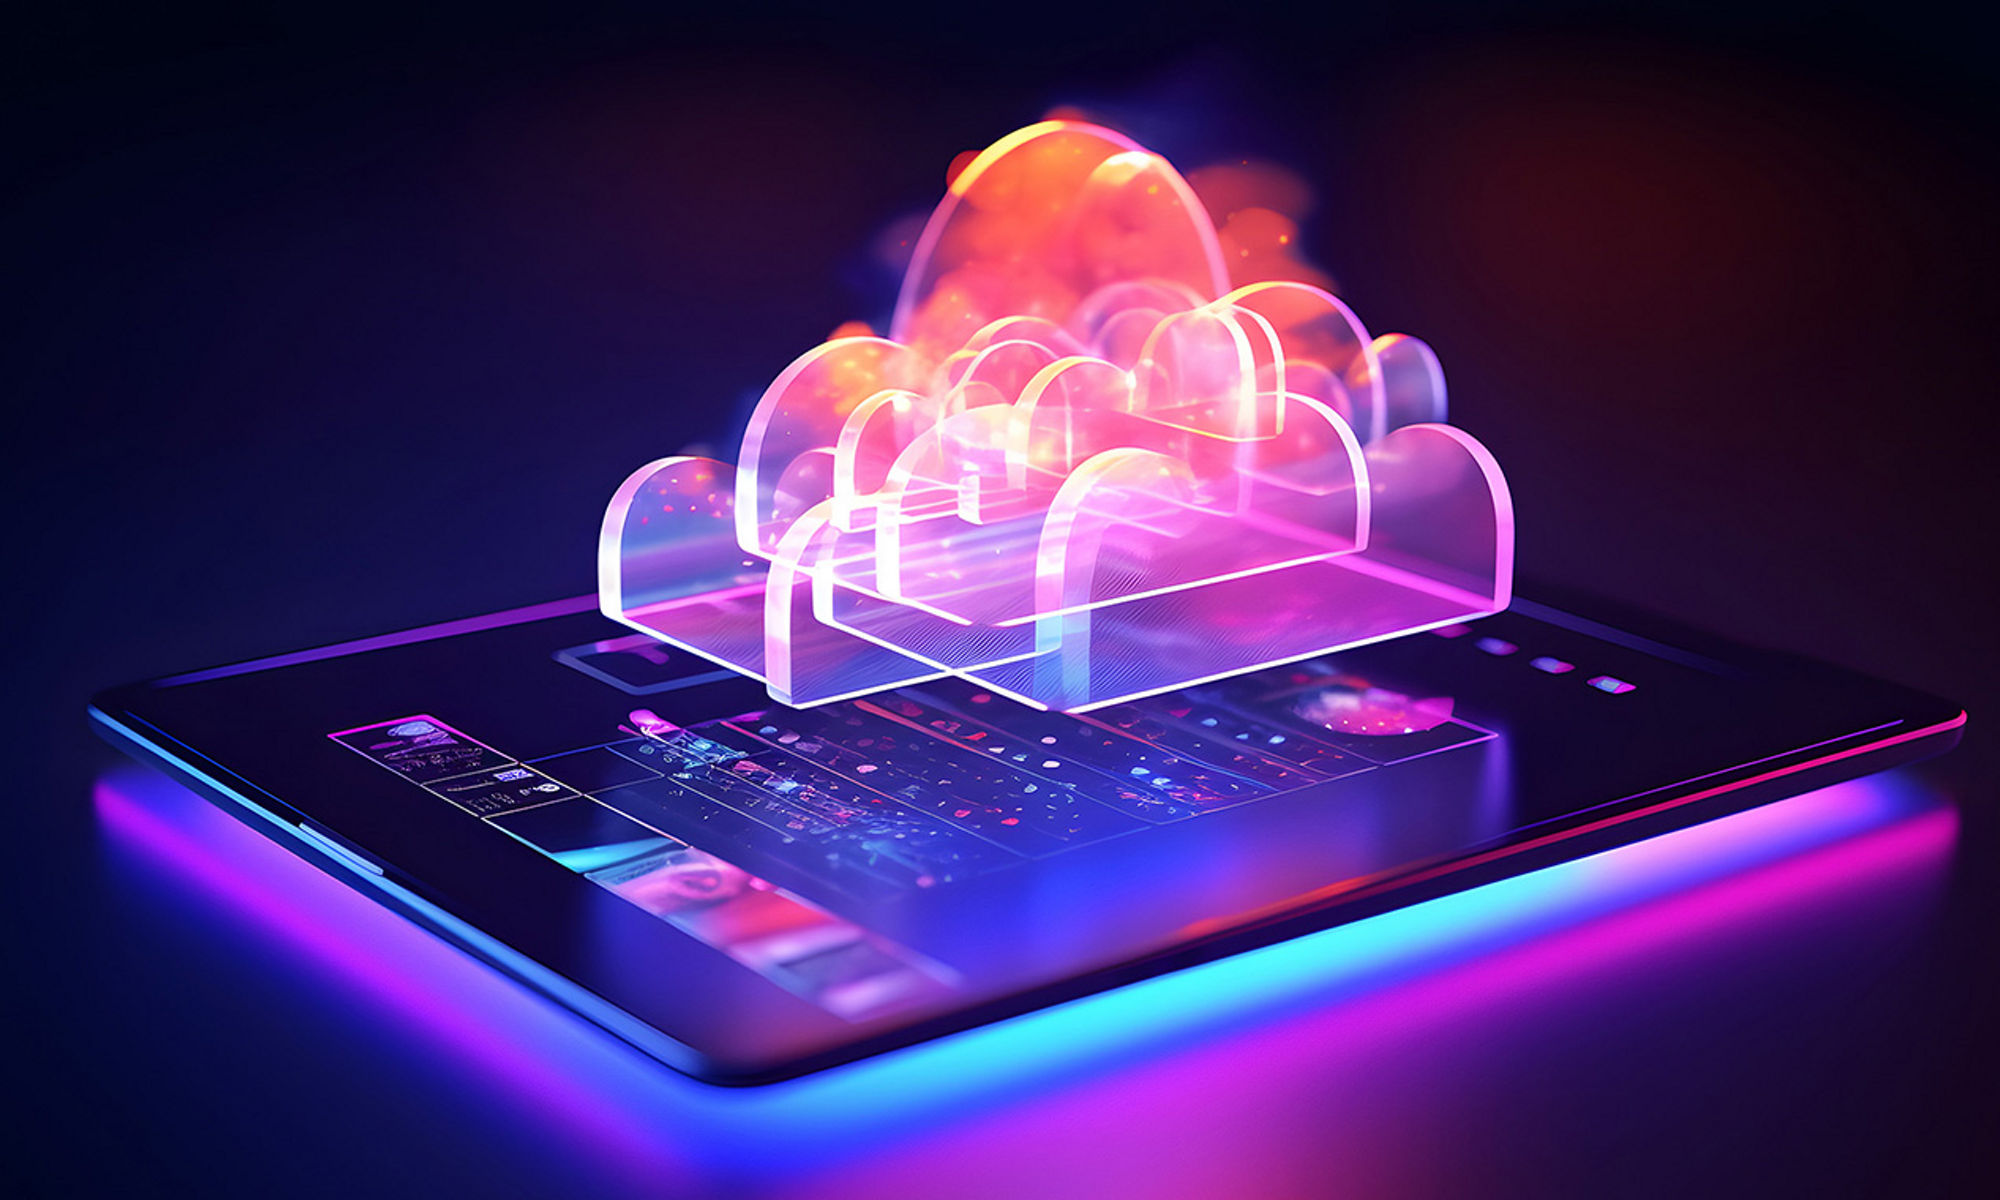 A cloud structure glowing with a mix of colors, hovering the screen of a tablet in a dark background.